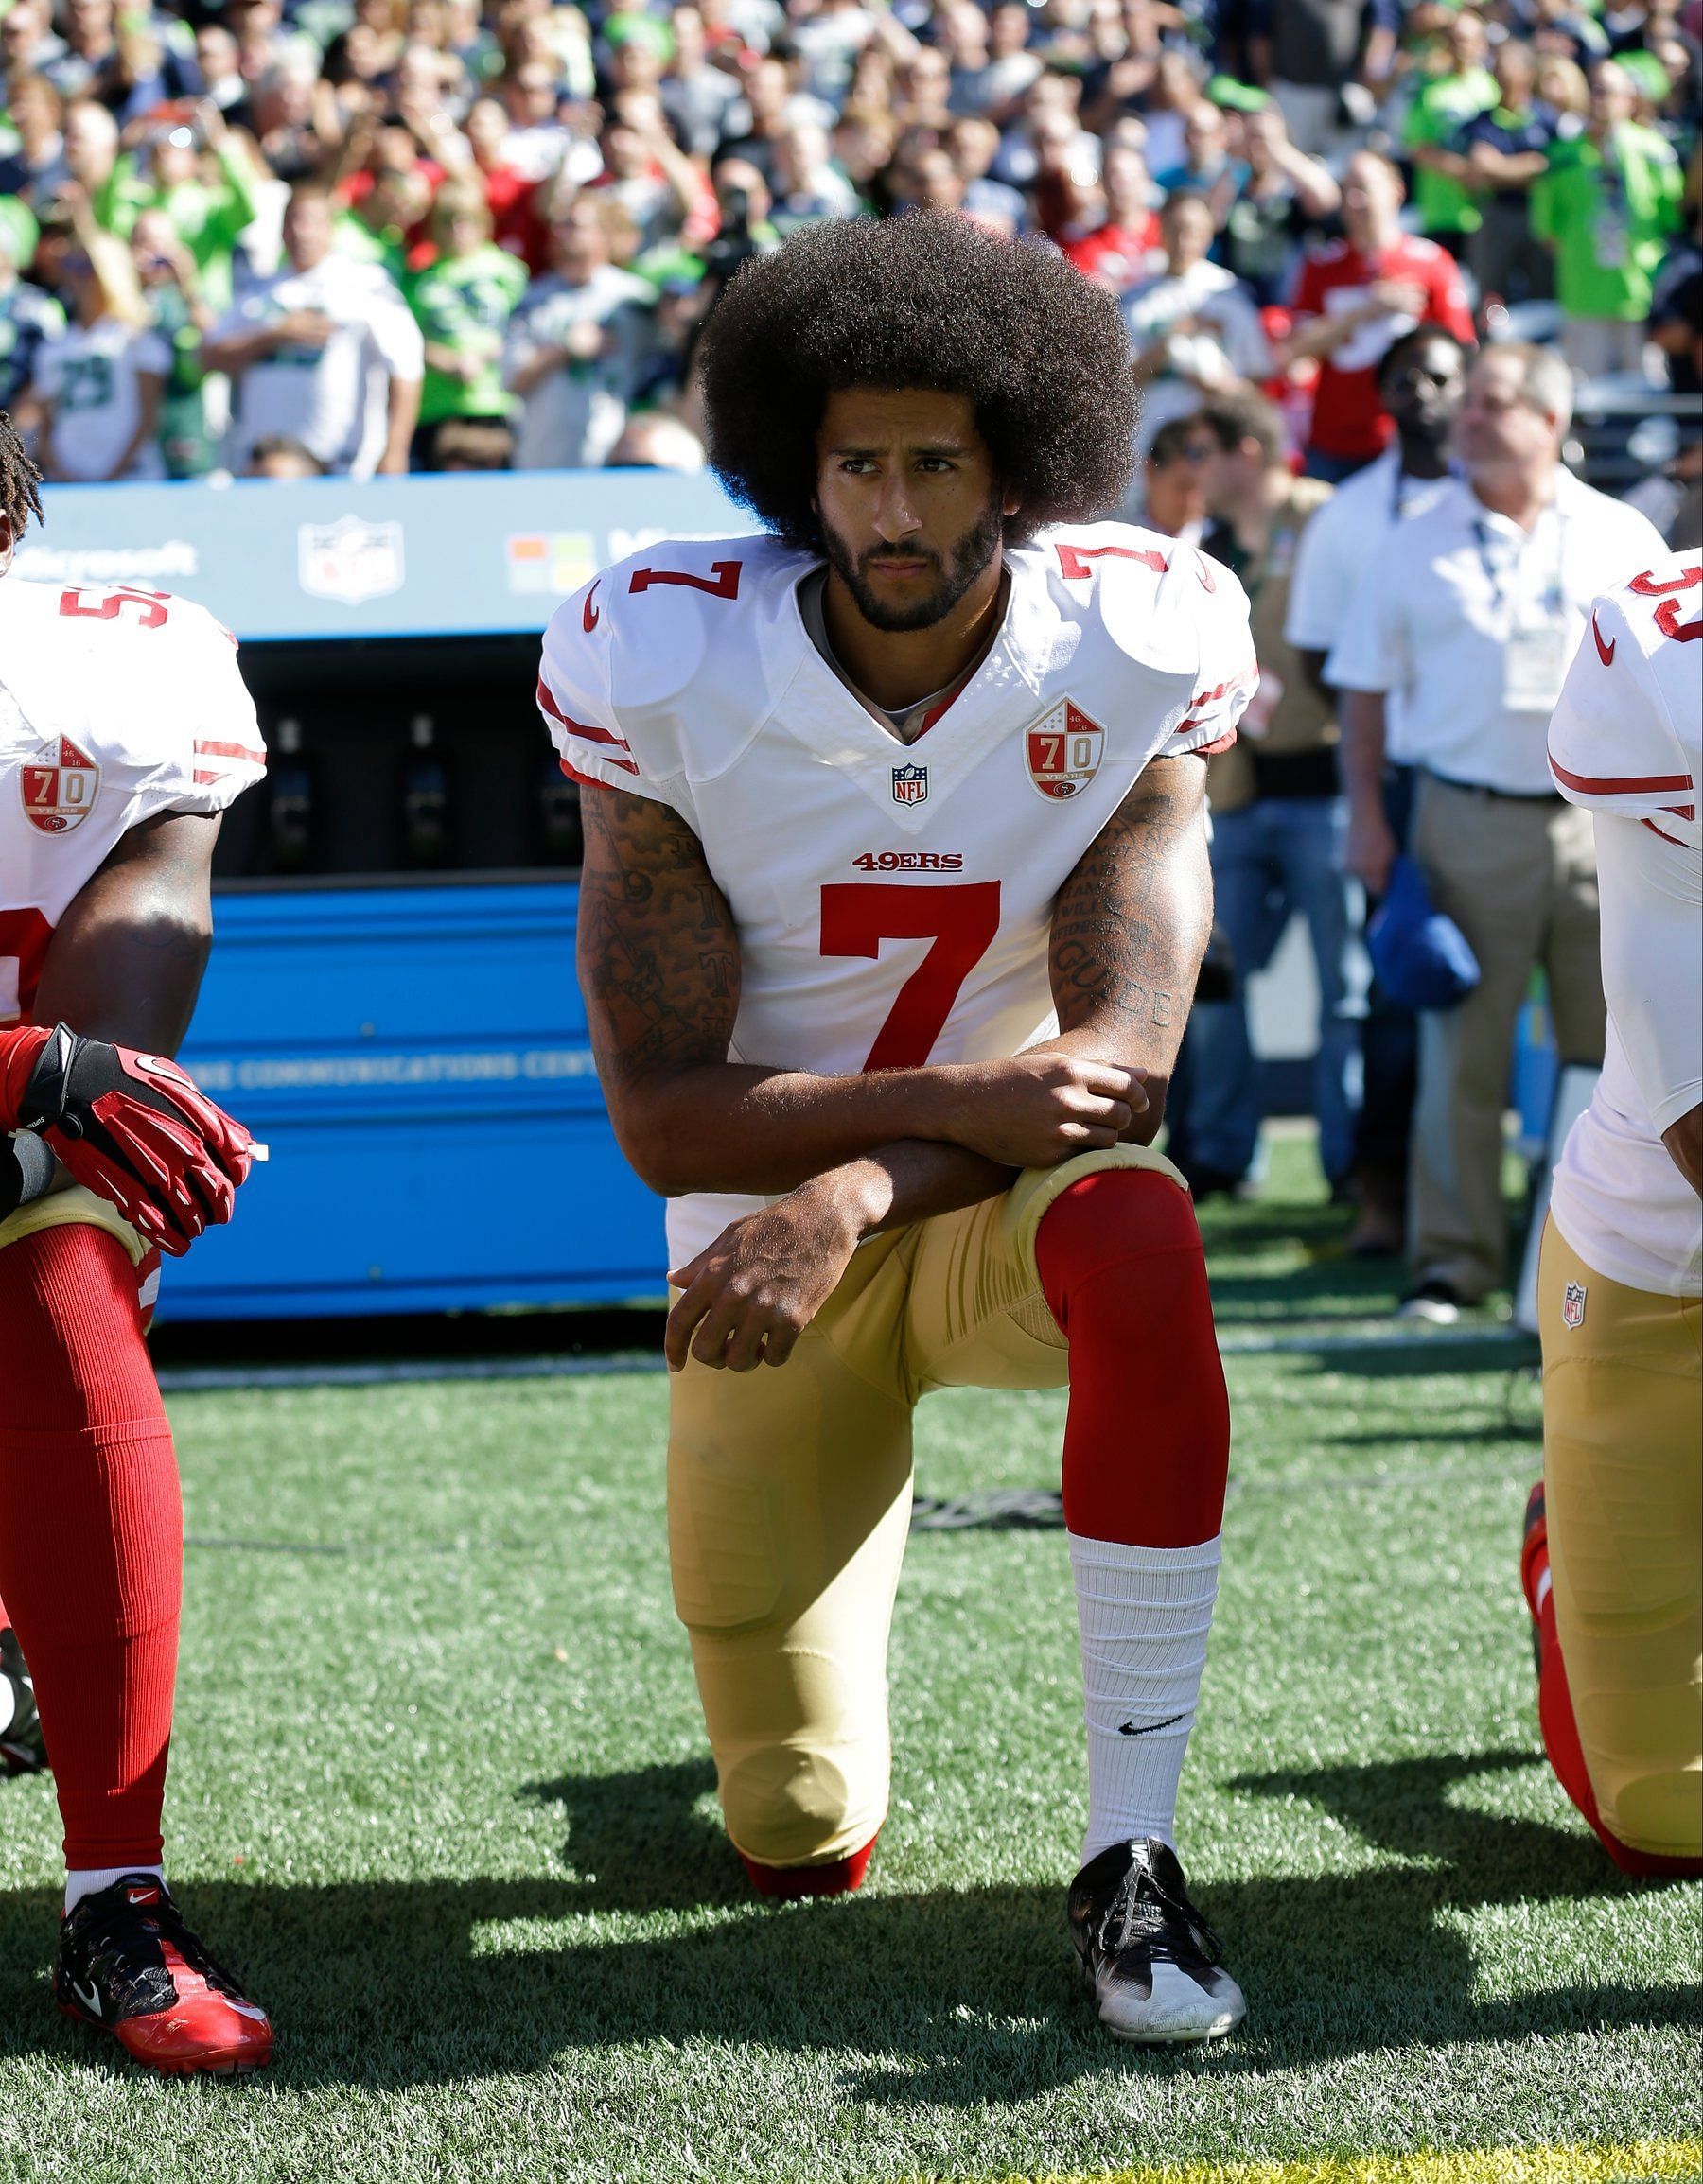 Kaepernick kneeling before a 49ers game. Source: The New York Times